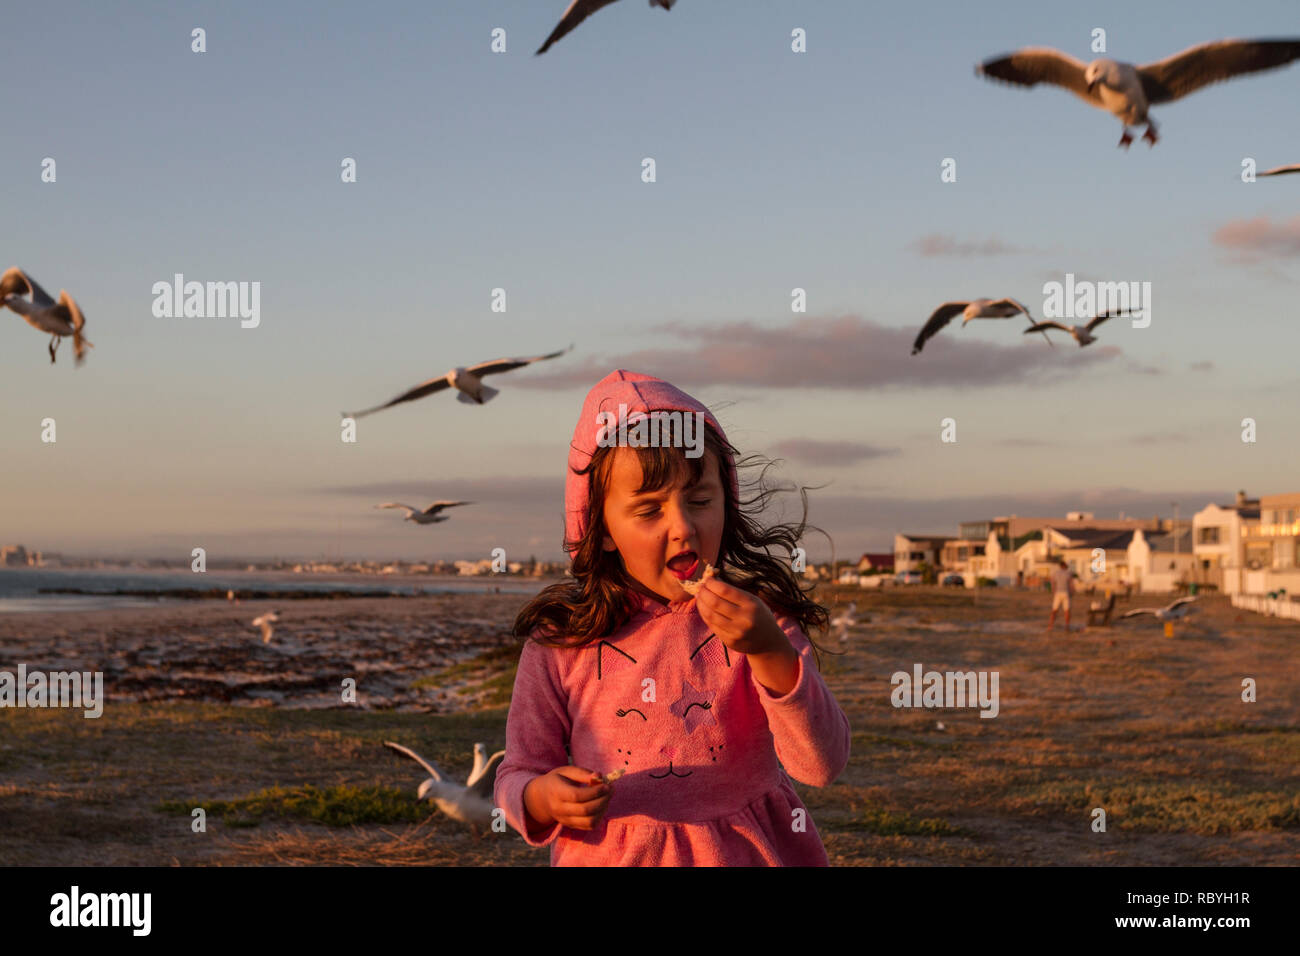 Young girl dressed in pink eating bread on the beach with seagulls flying above Stock Photo